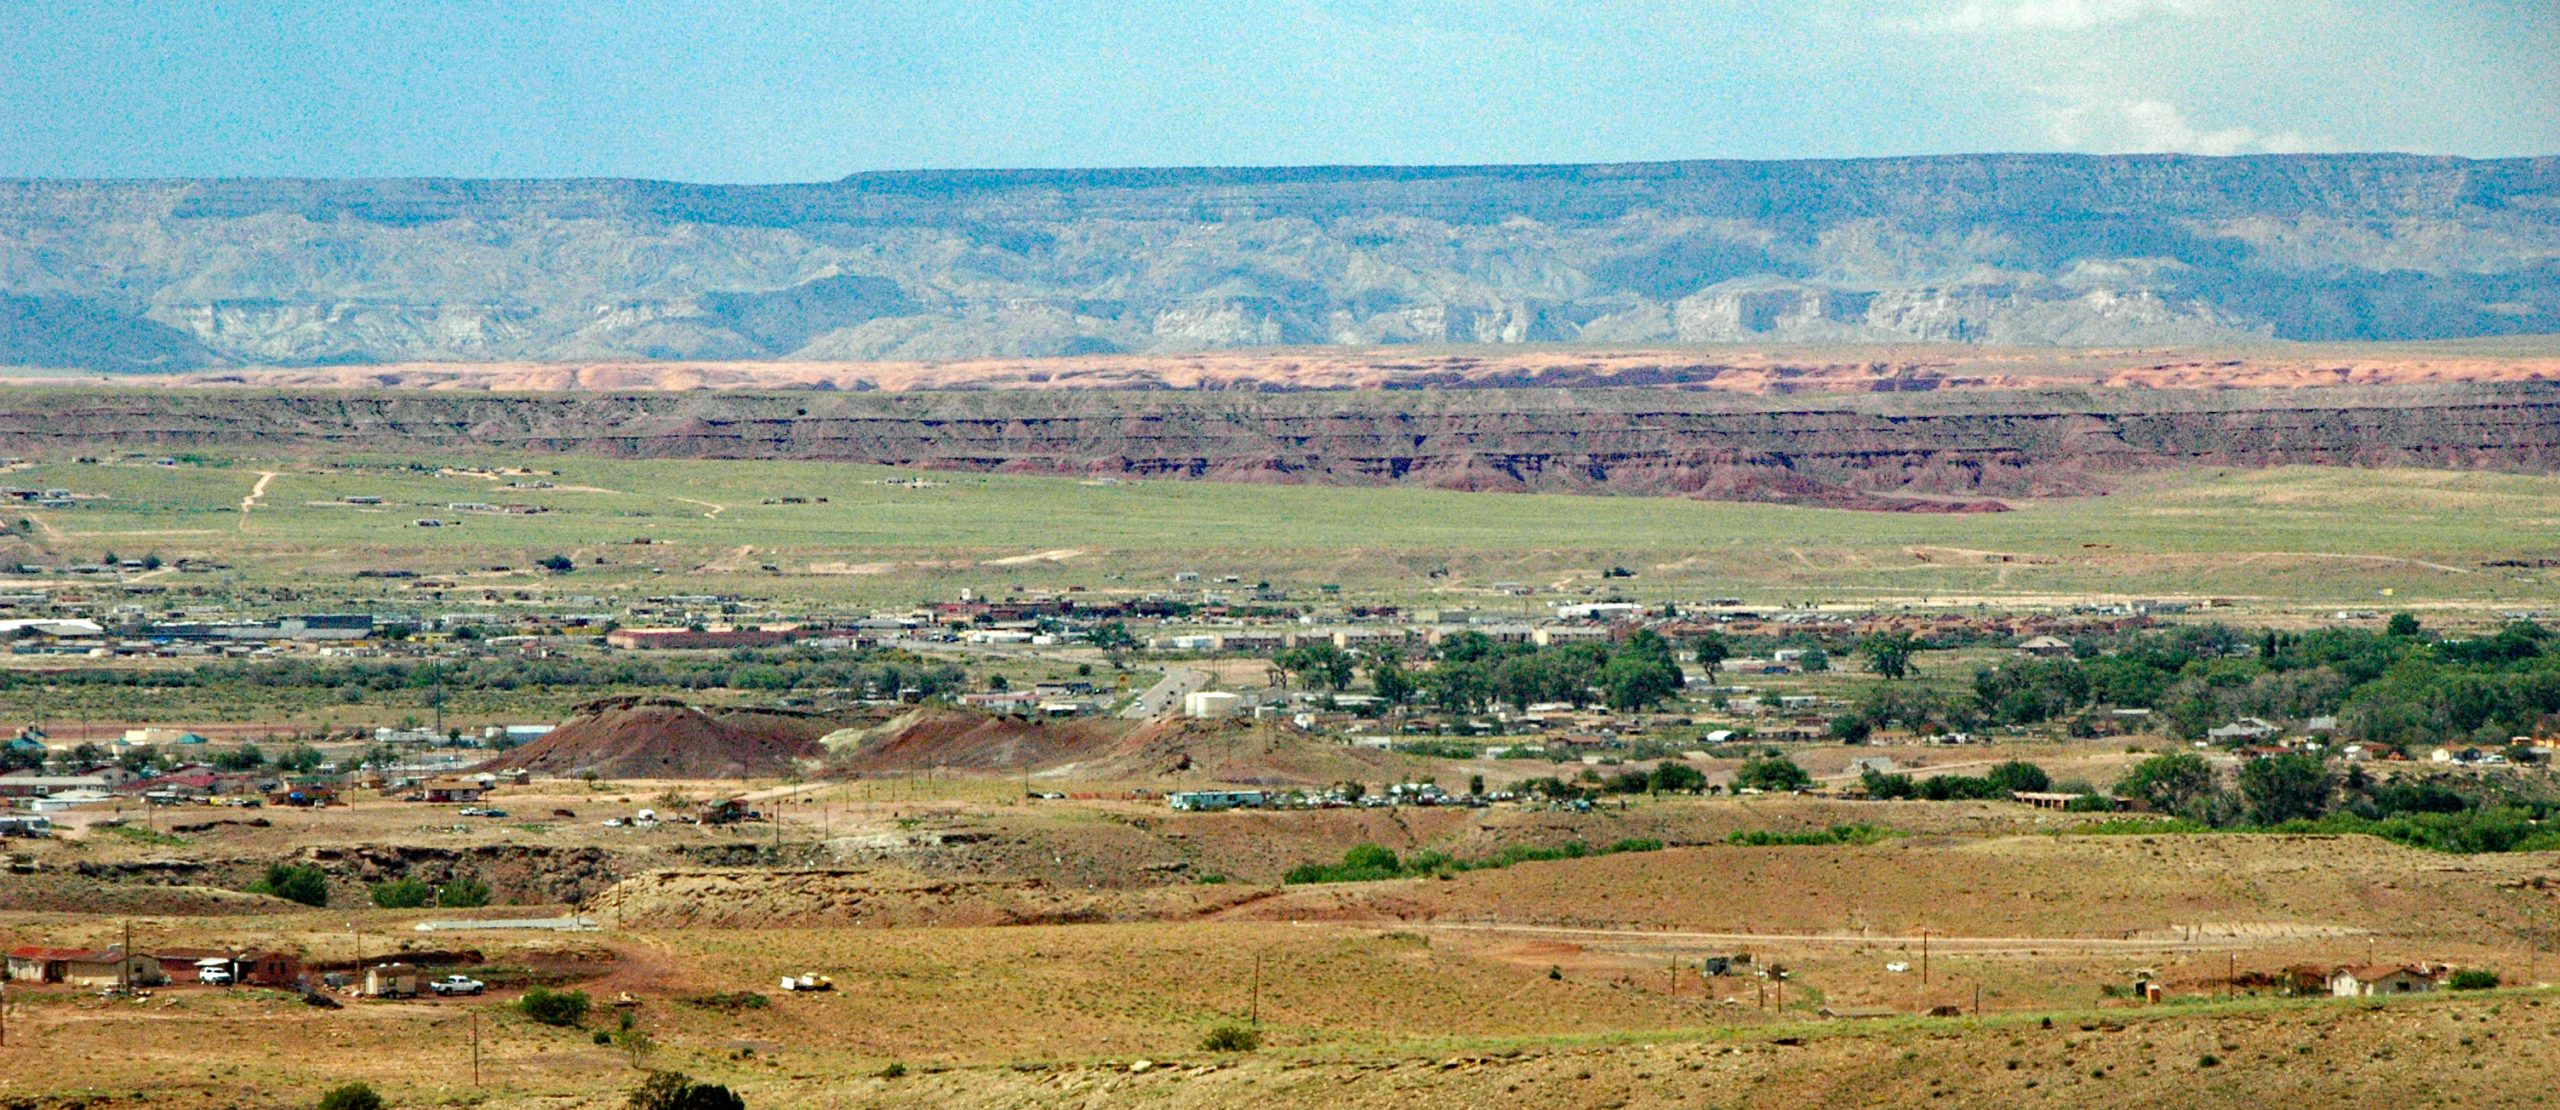 Chinle is one of the towns in the Navajo Nation that will receive a wastewater treatment upgrade.